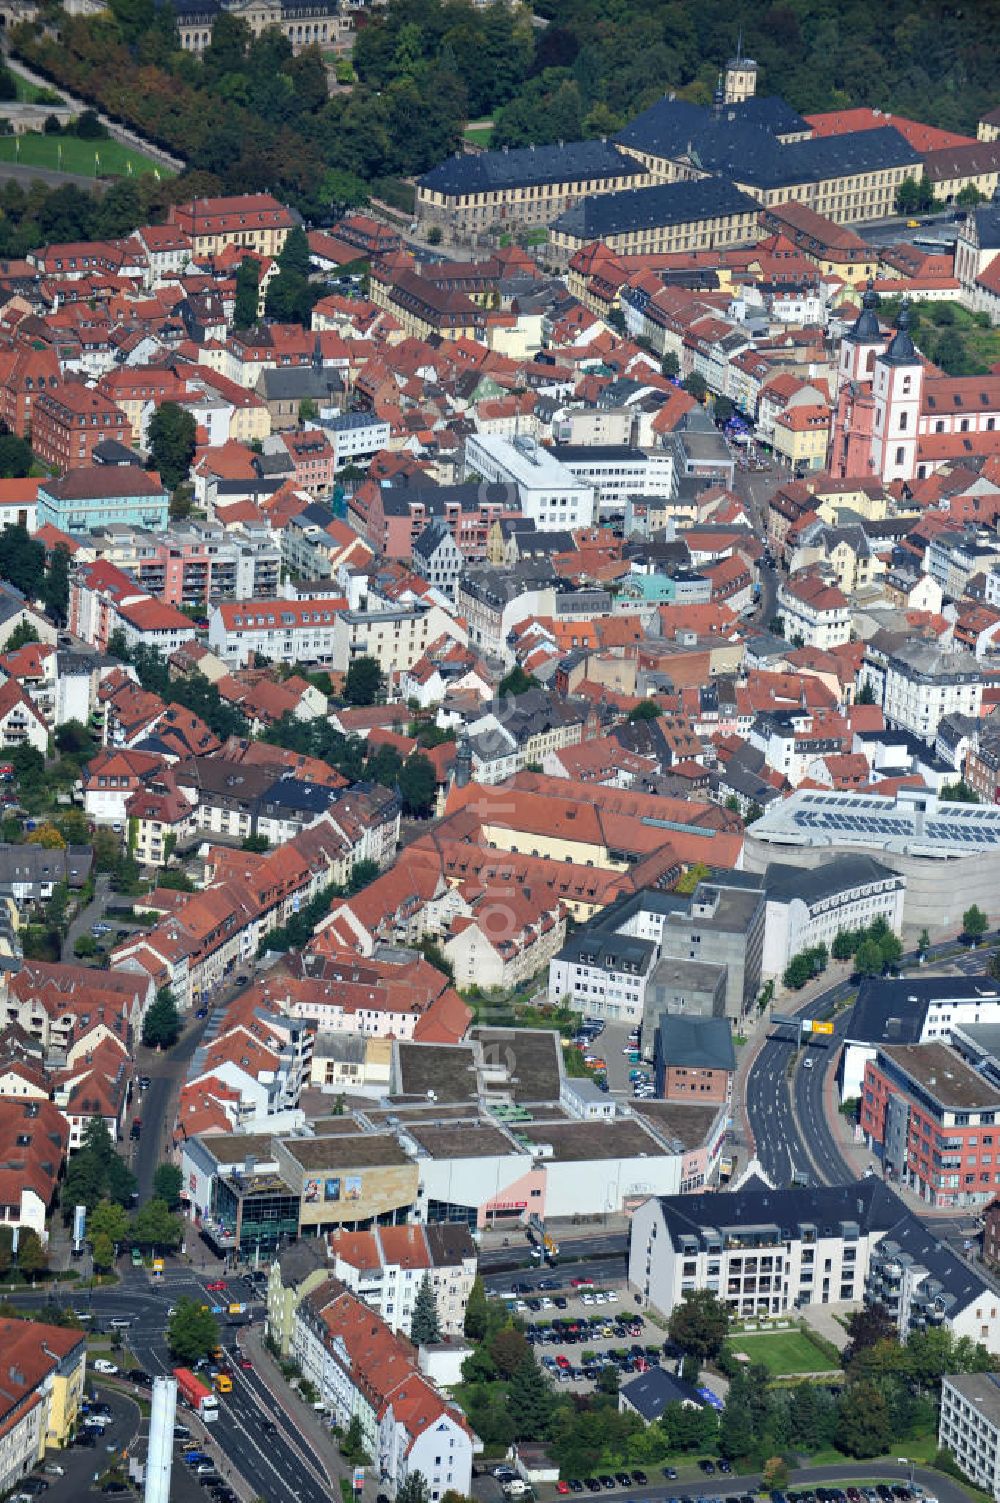 Aerial image Fulda - View the town of Fulda in the downtown area at the Catholic Holy Spirit Church, the Vonderau Museum and the parish church of St. Blaise in the background